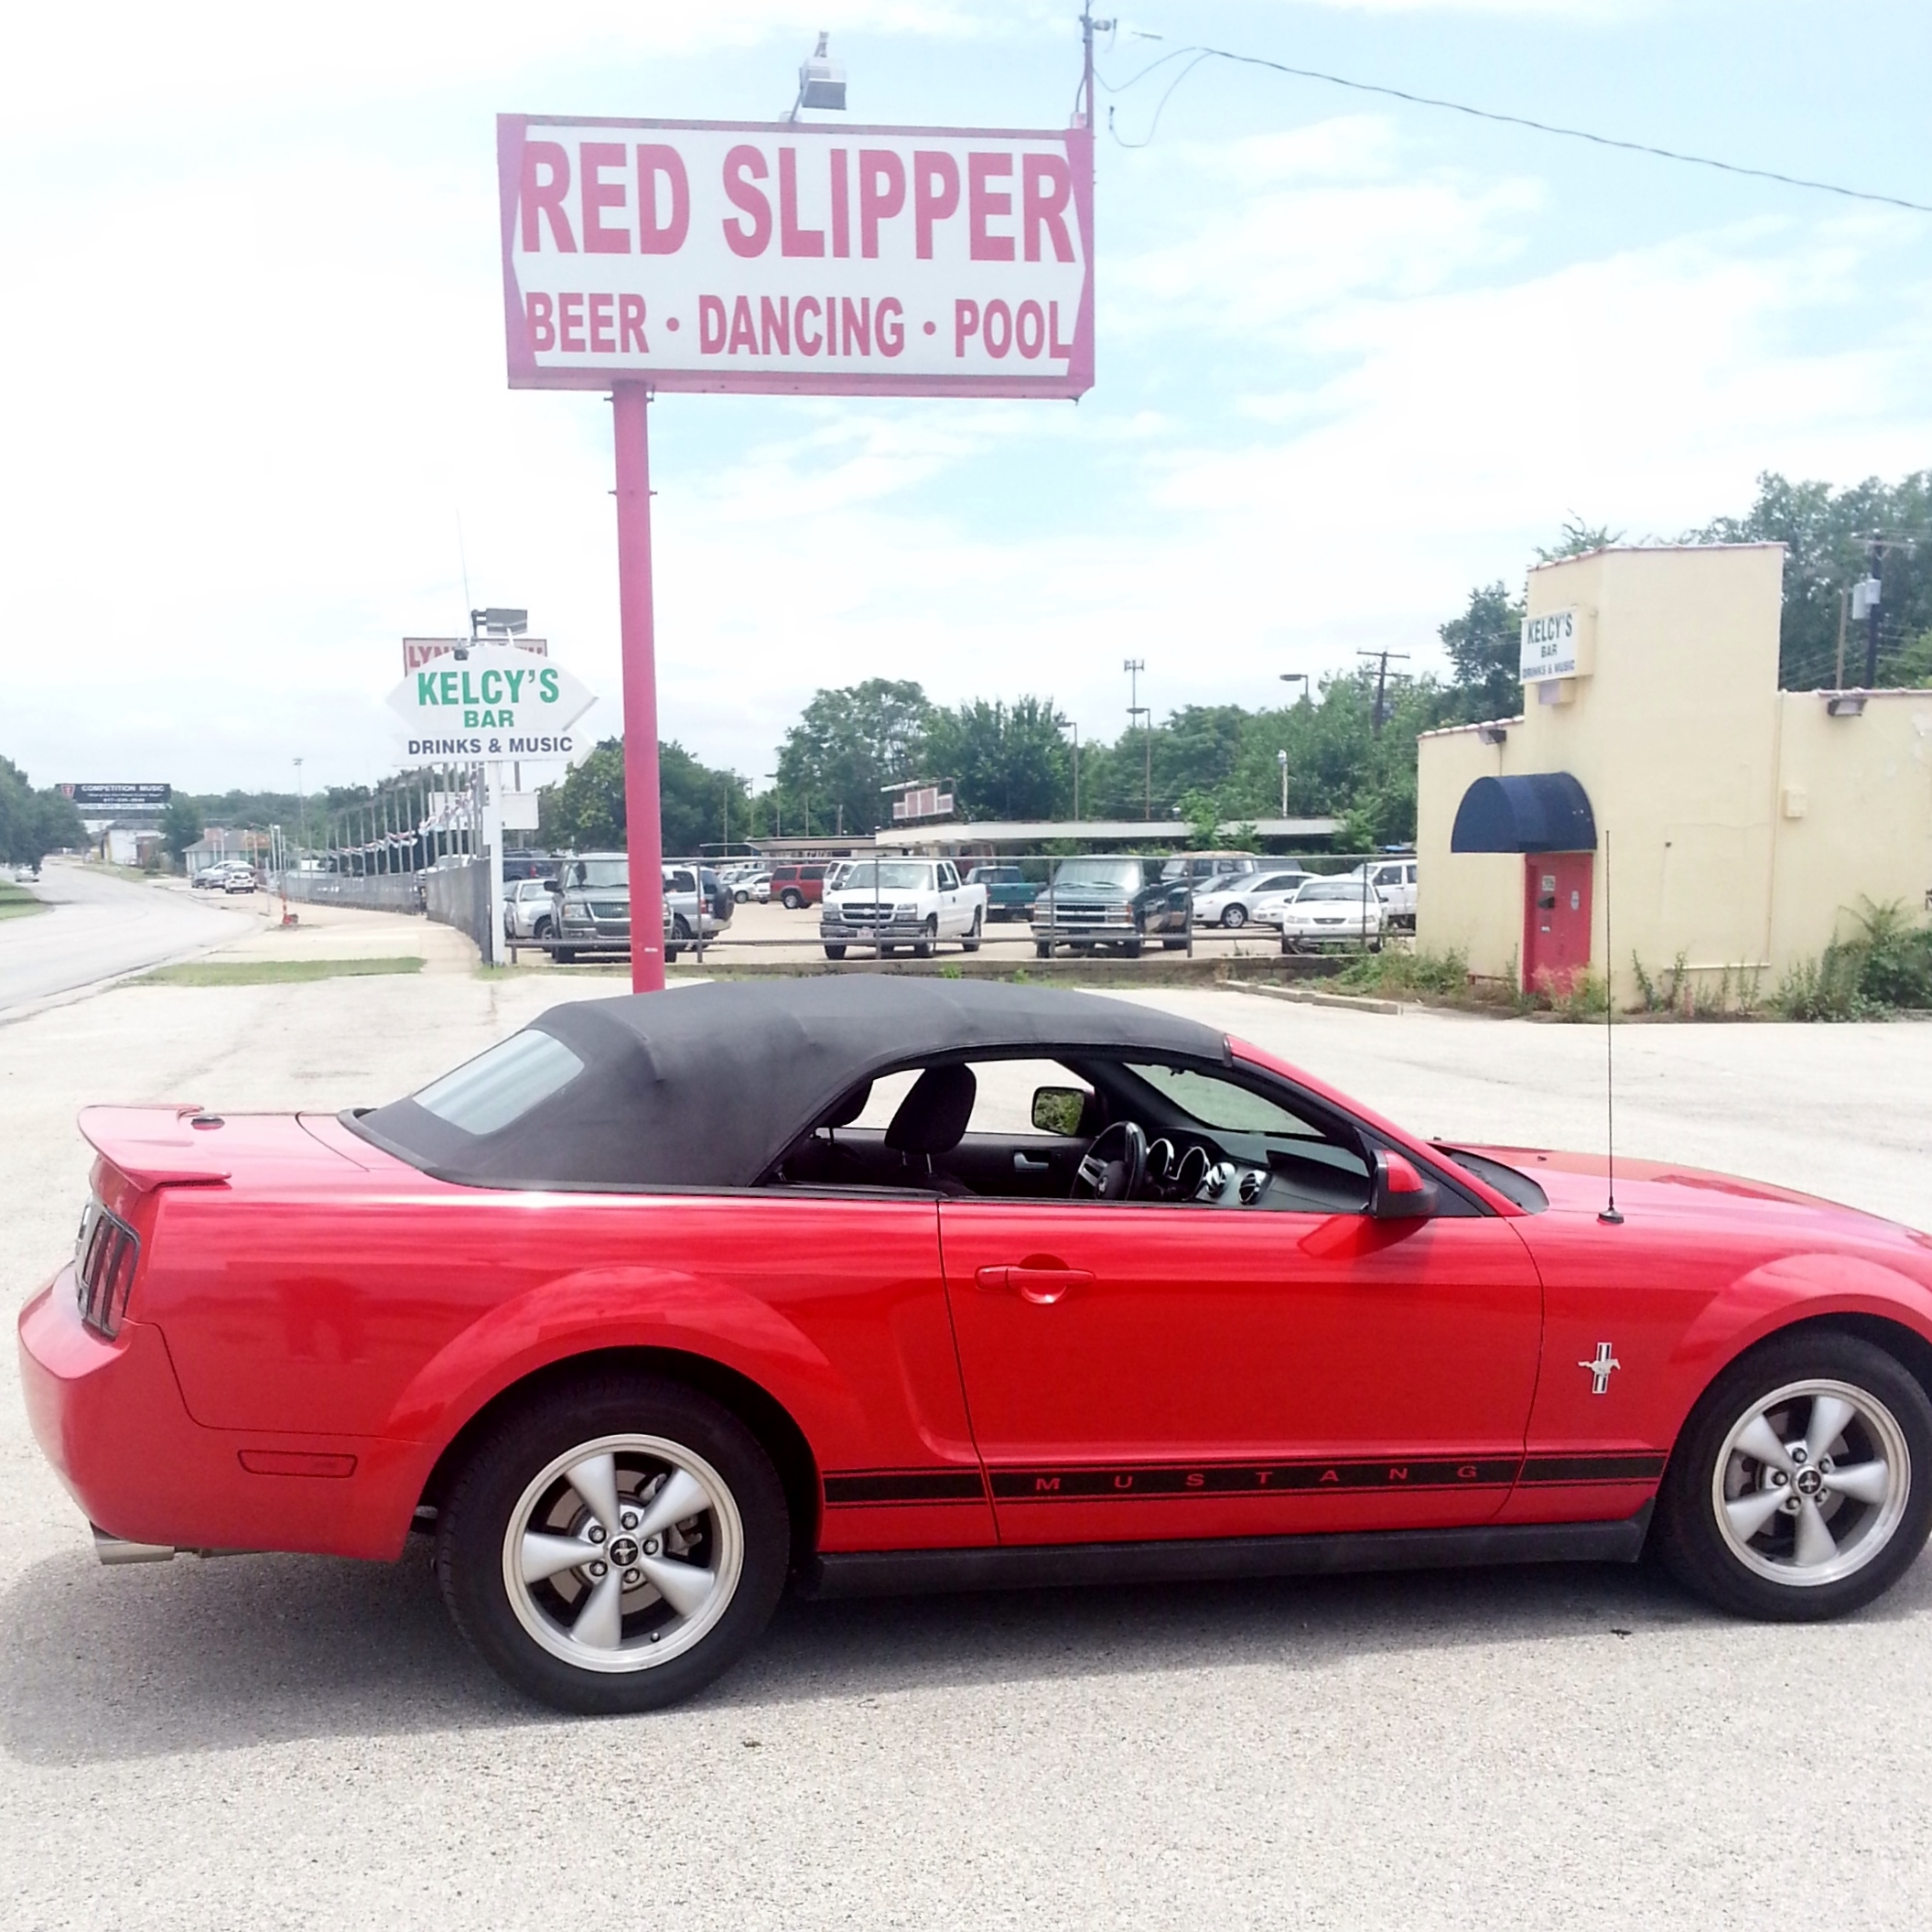 S650 Mustang 2.3L S650 base convertible red slipper